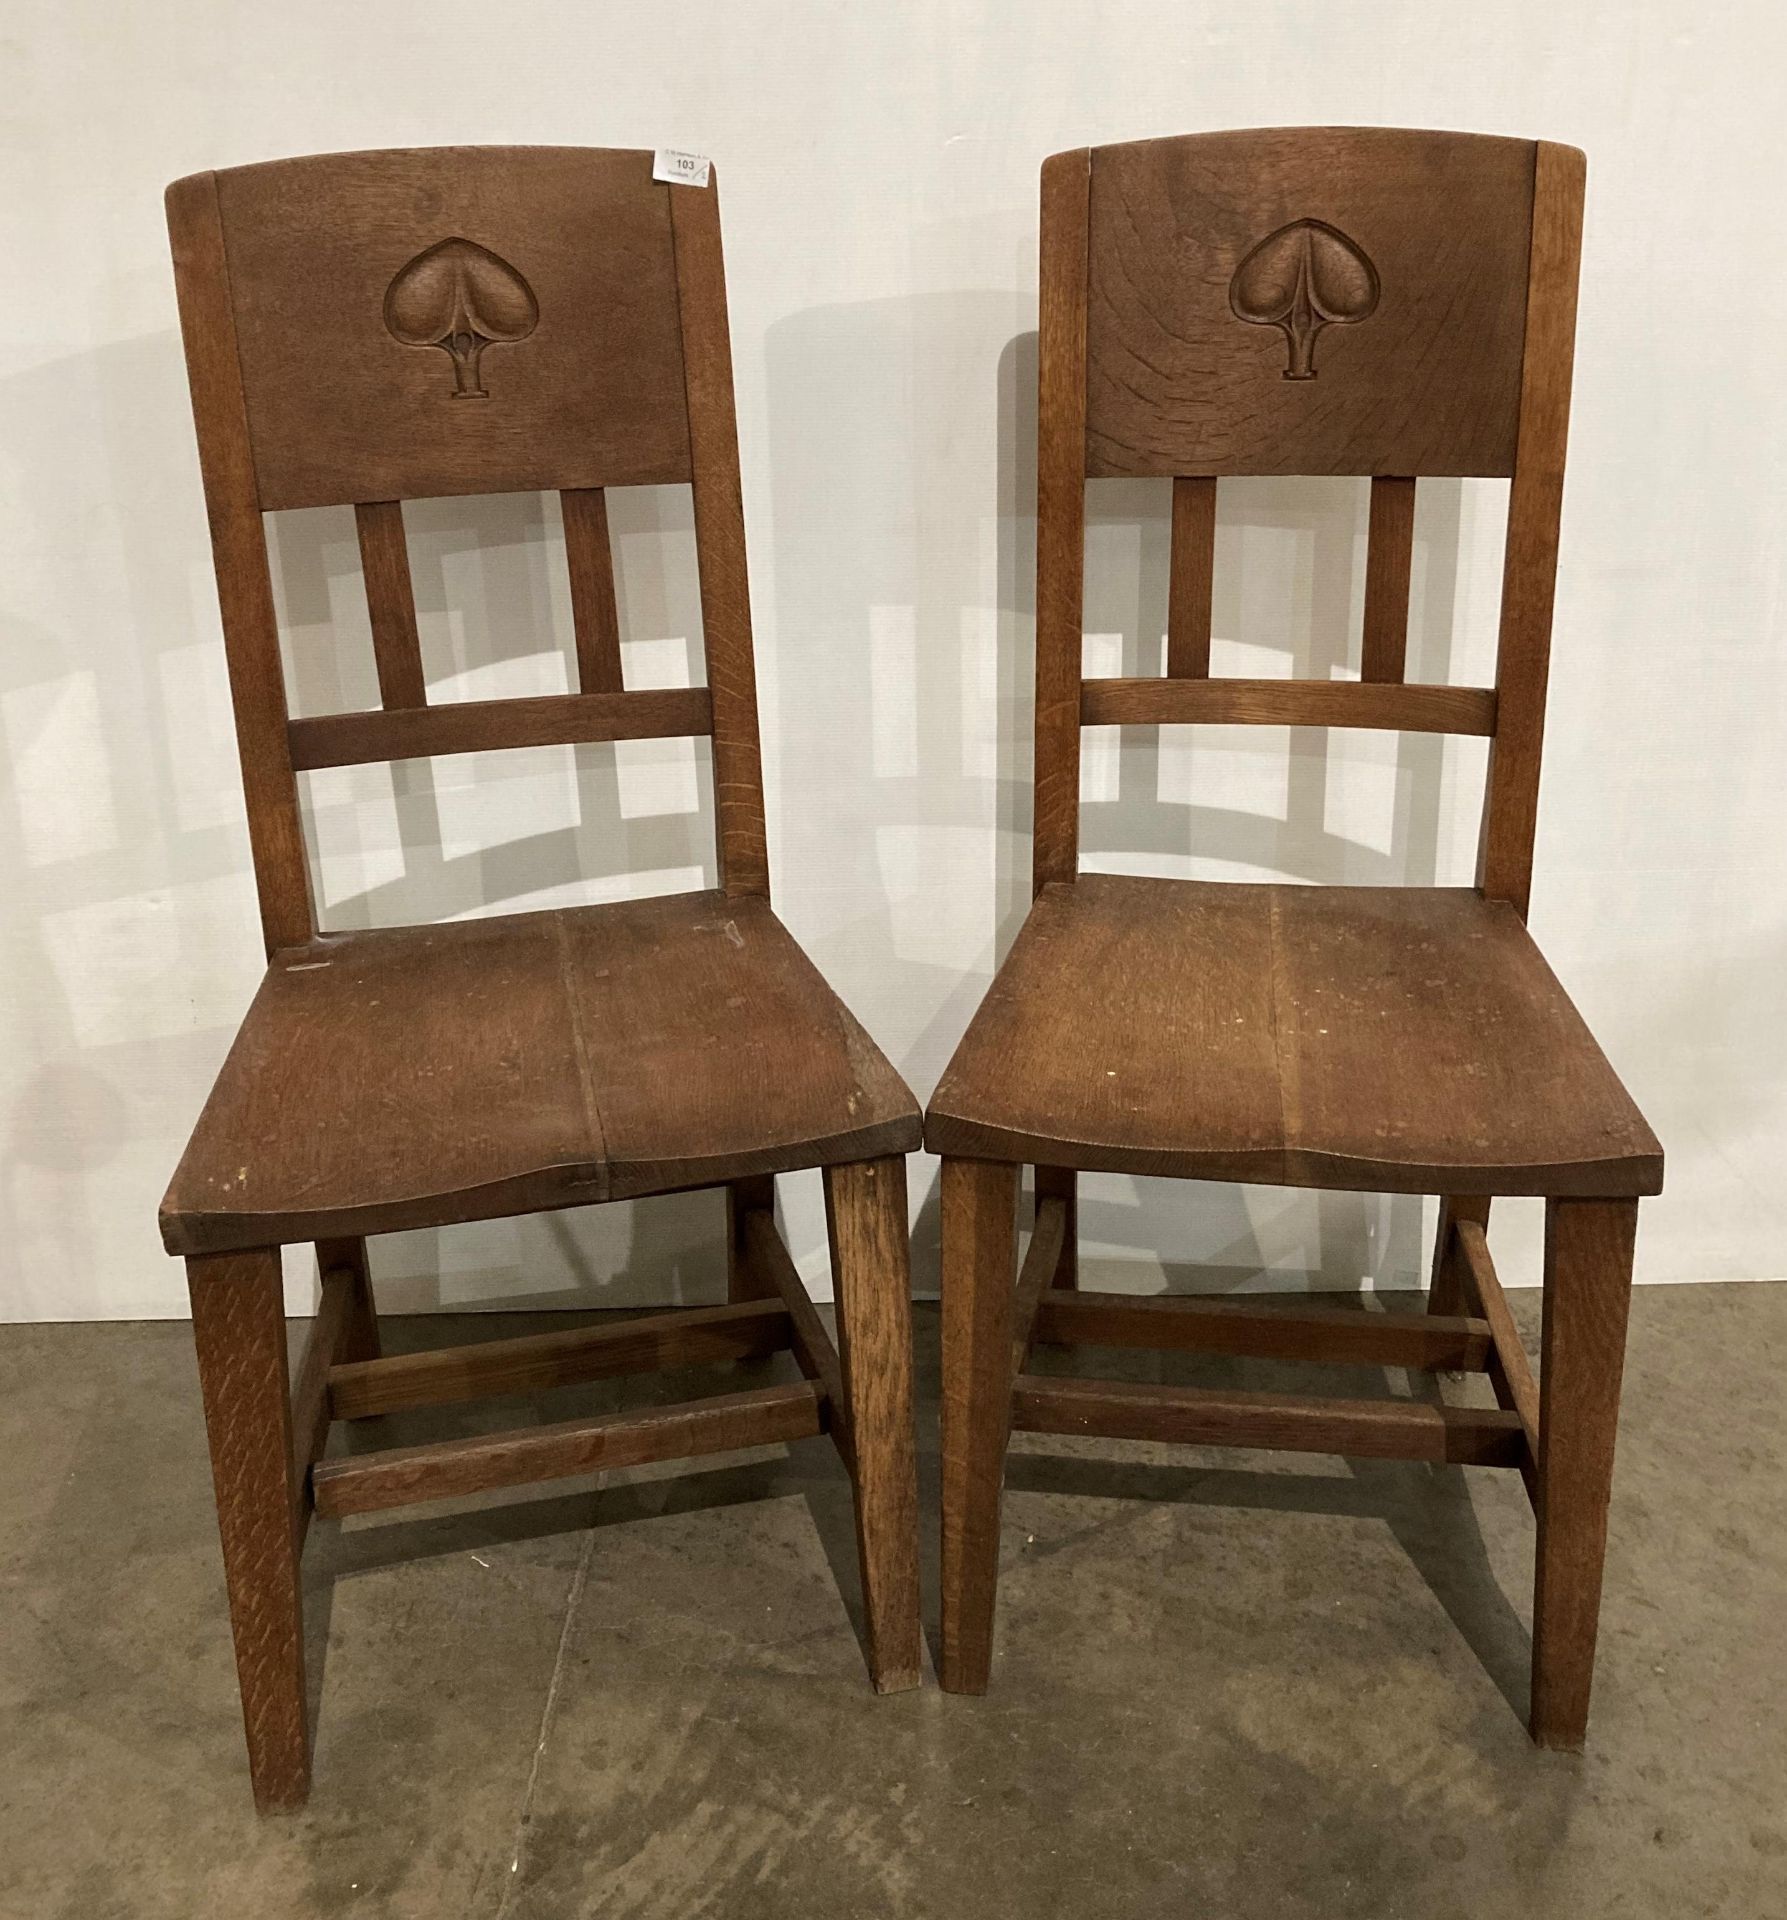 A pair of Arts & Crafts oak chairs designed by William James Neatby (1860-1910) with hand-carved